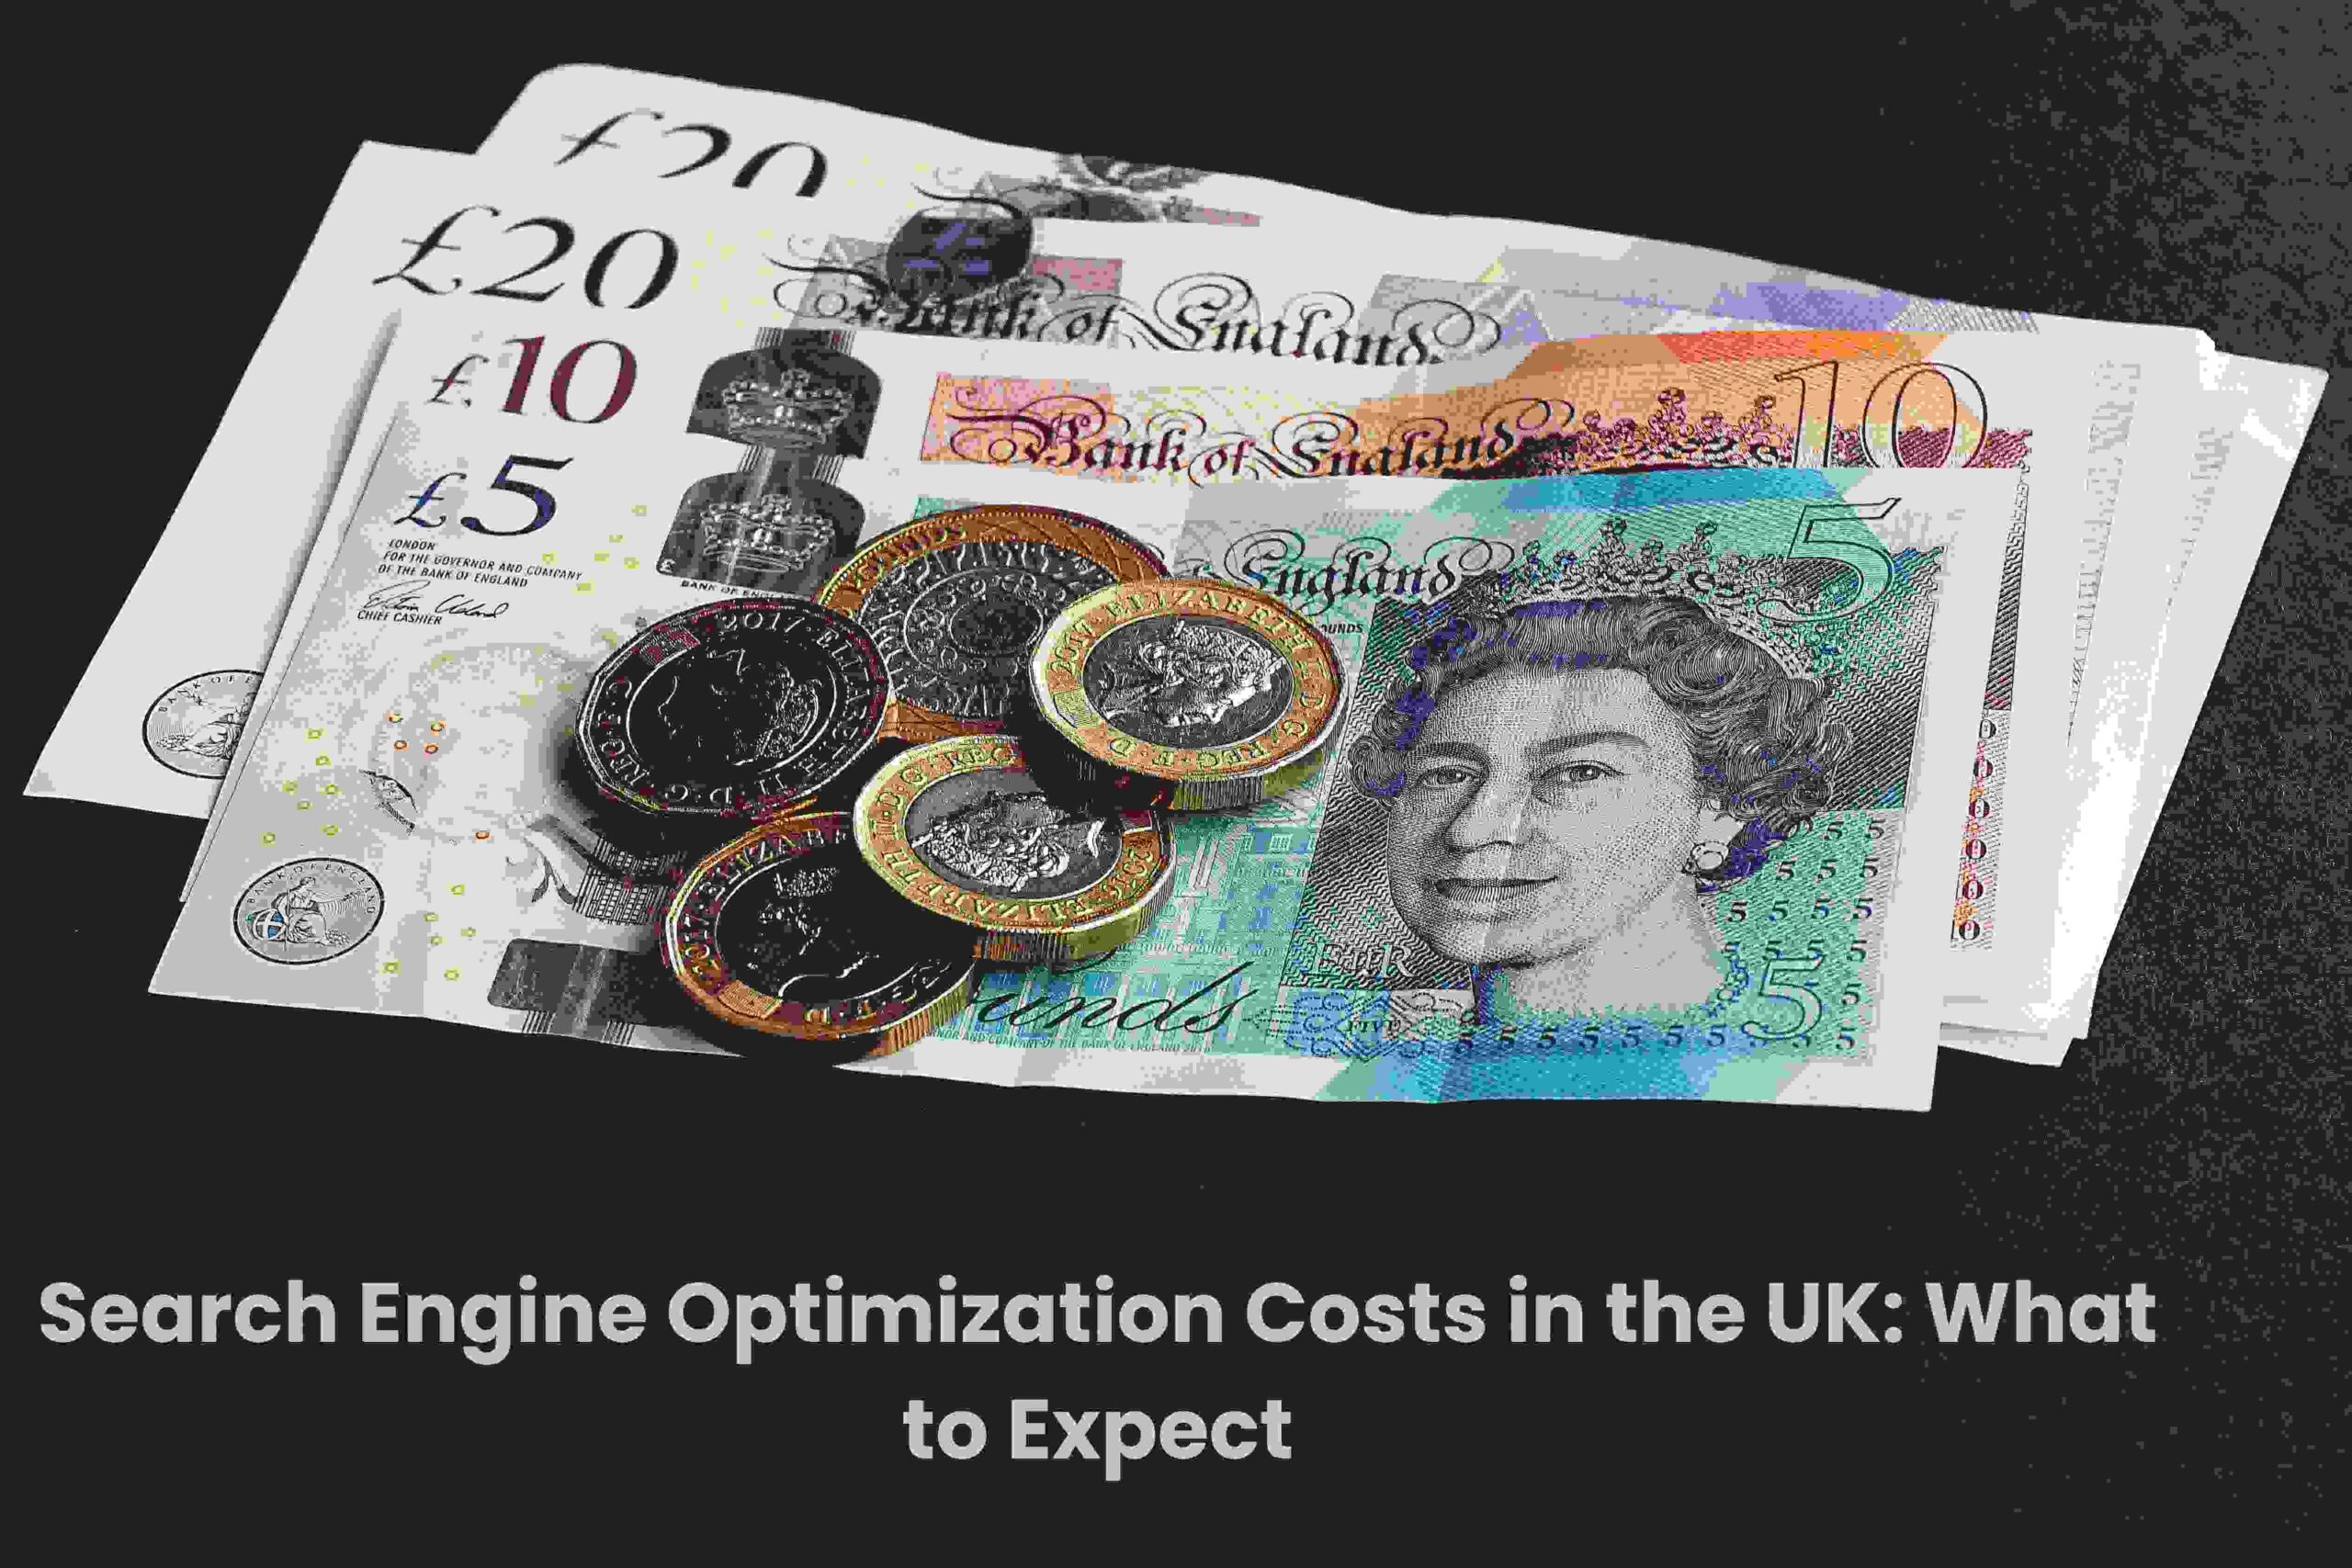 Search Engine Optimization Costs in the UK What to Expect